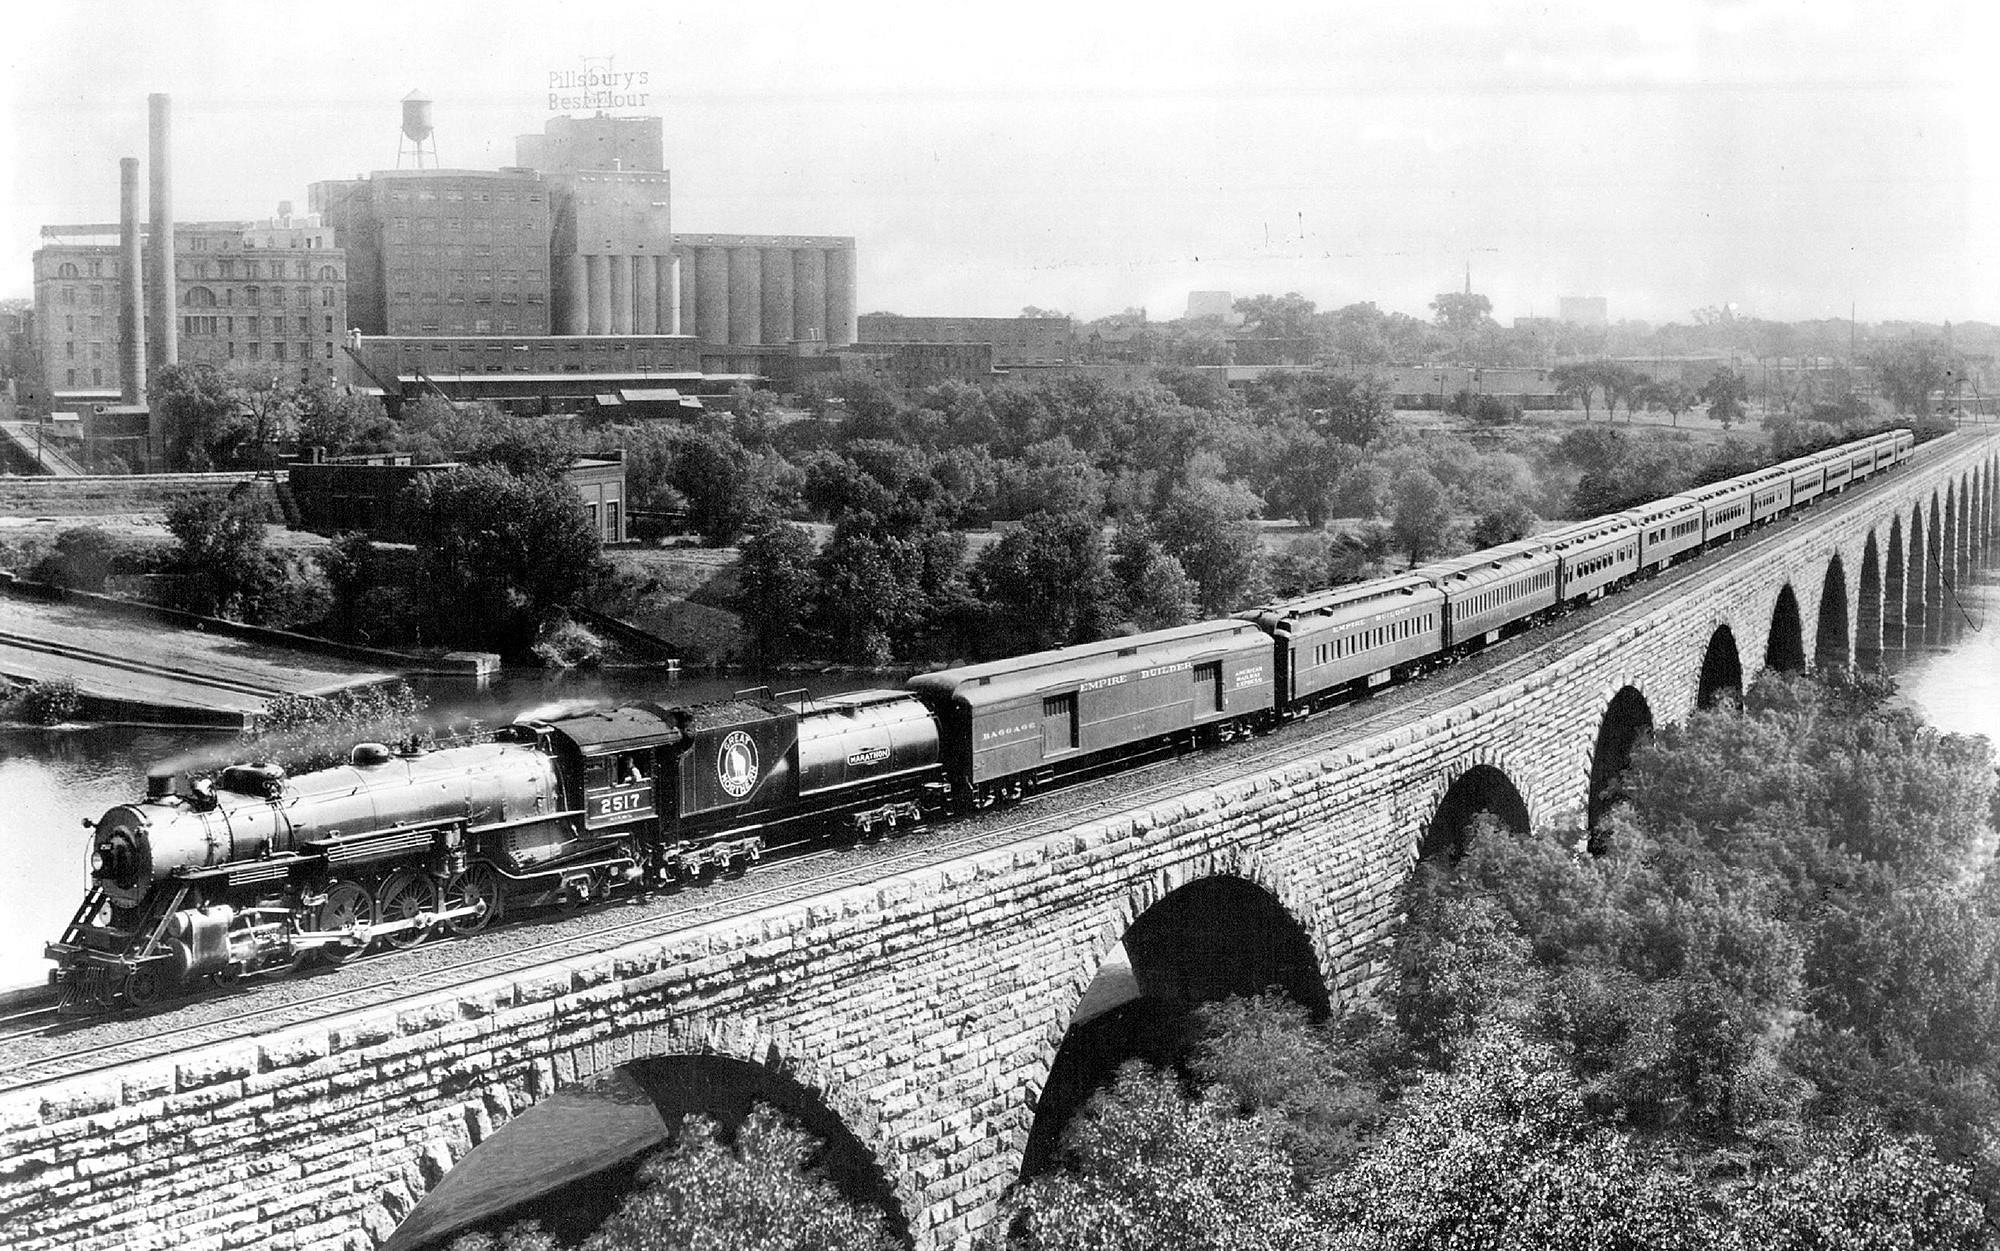 Great Northern Railway's first Empire Builder is pictured on the Stone Arch Bridge crossing the Mississippi River, likely in the 1920s or 1930s. 